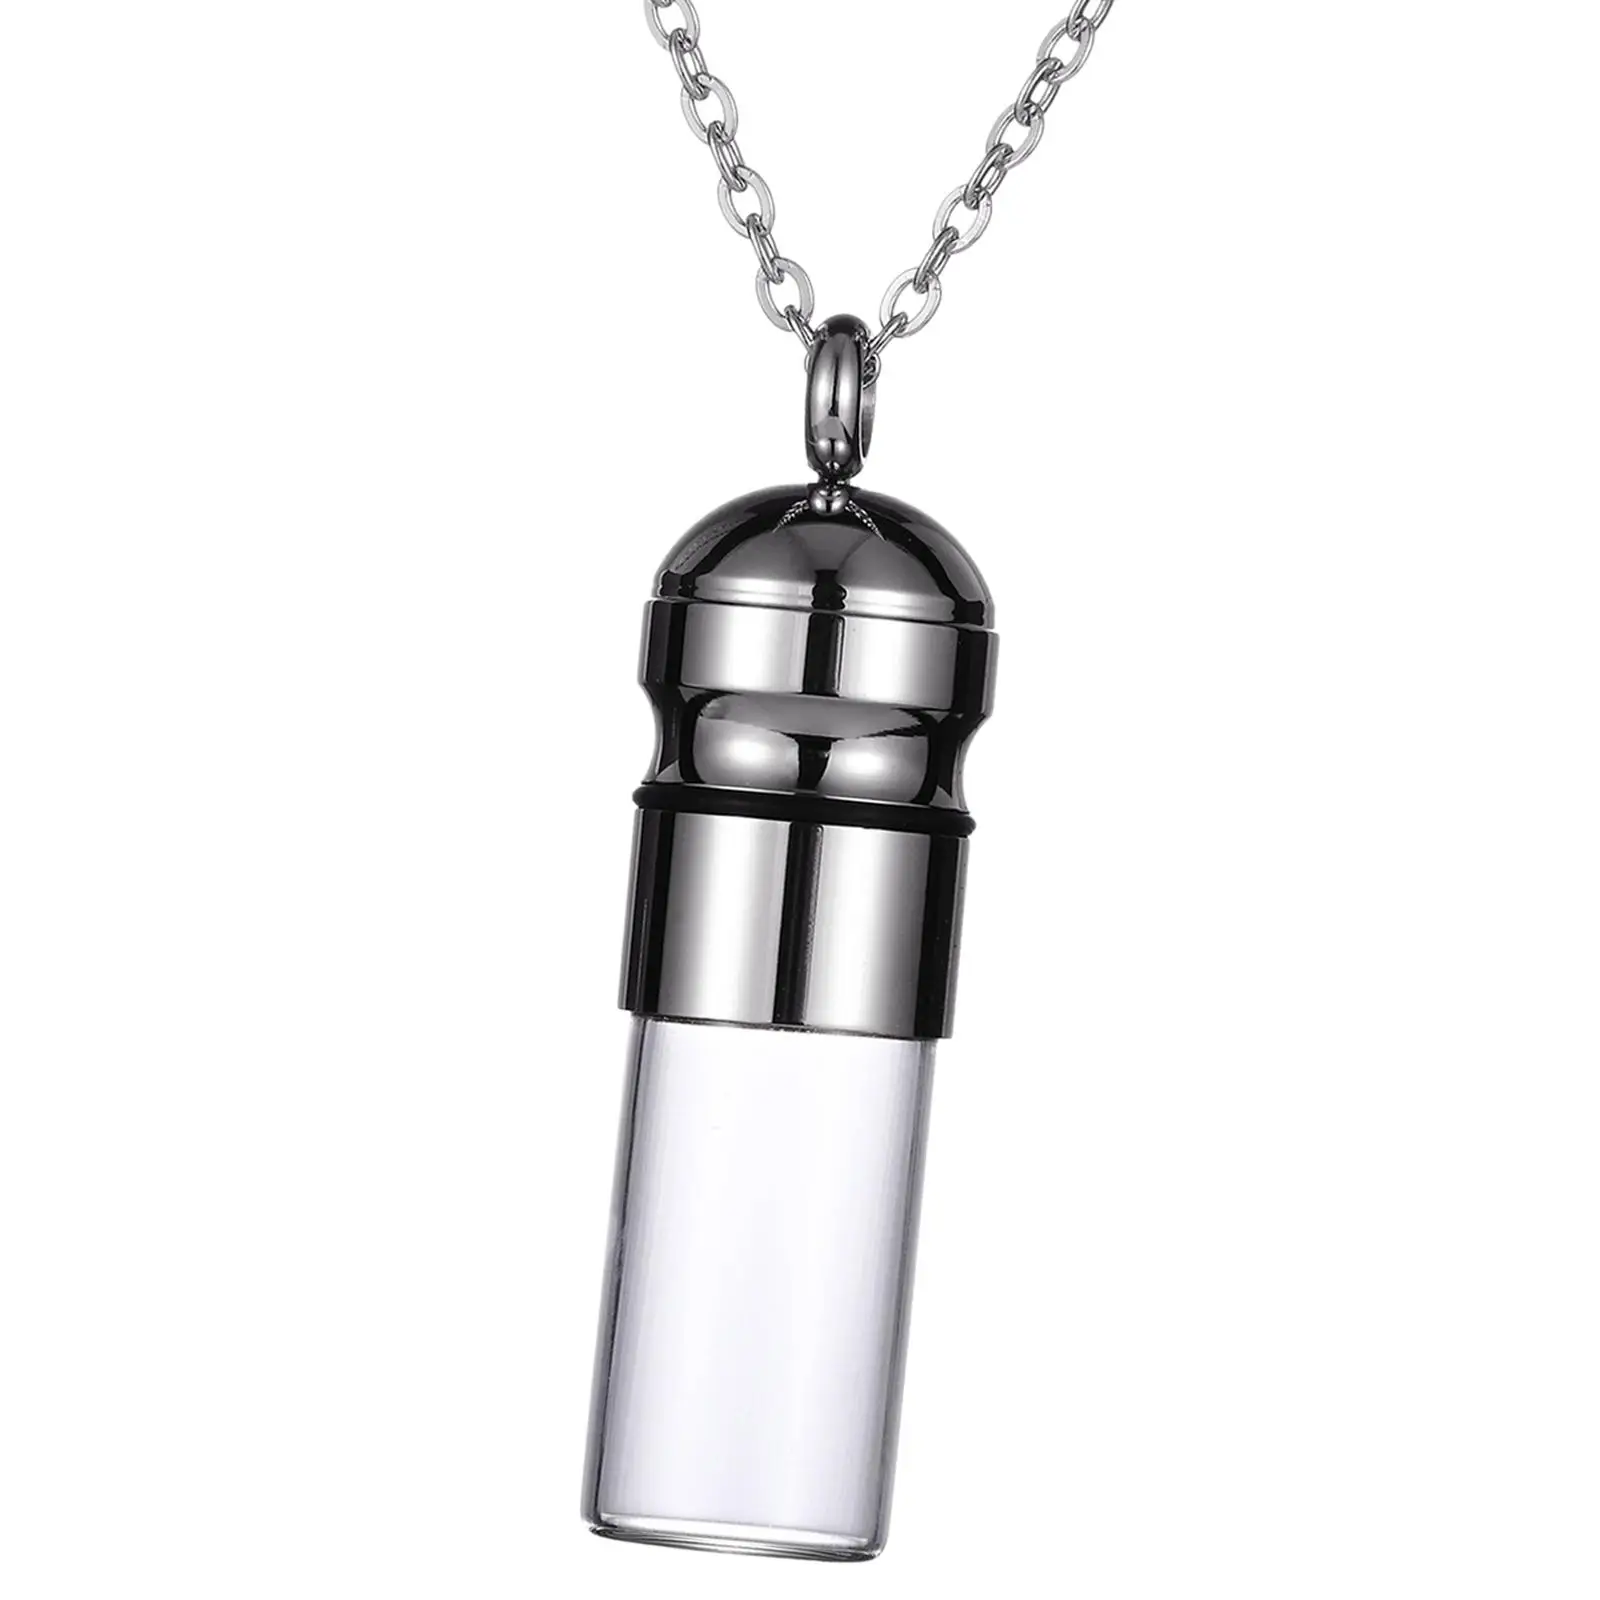 Clear Pendant Cremation Urn Necklace Perfume Holder Openable Pet Ashes Holder Jewelry Memorial Pendant for Dog Cat Friends